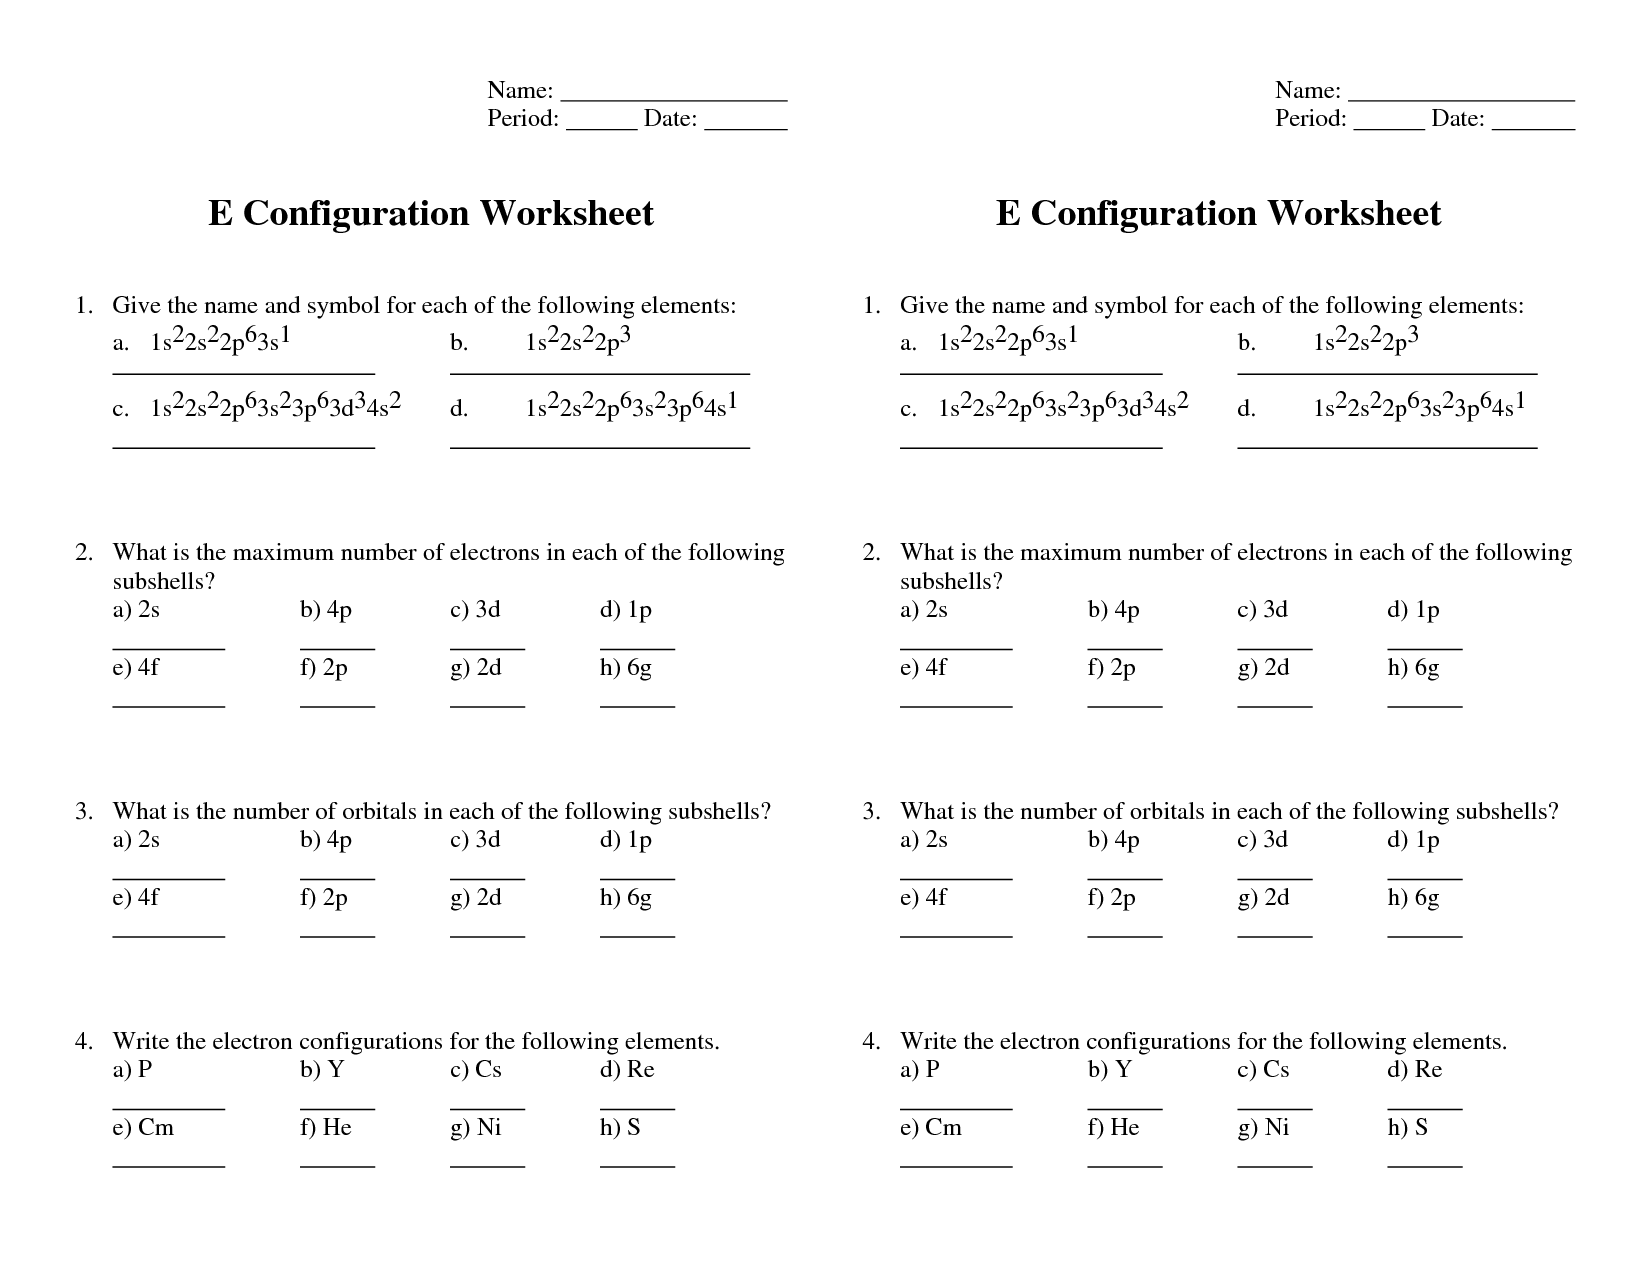 electron-configurations-quantum-numbers-worksheet-10-29